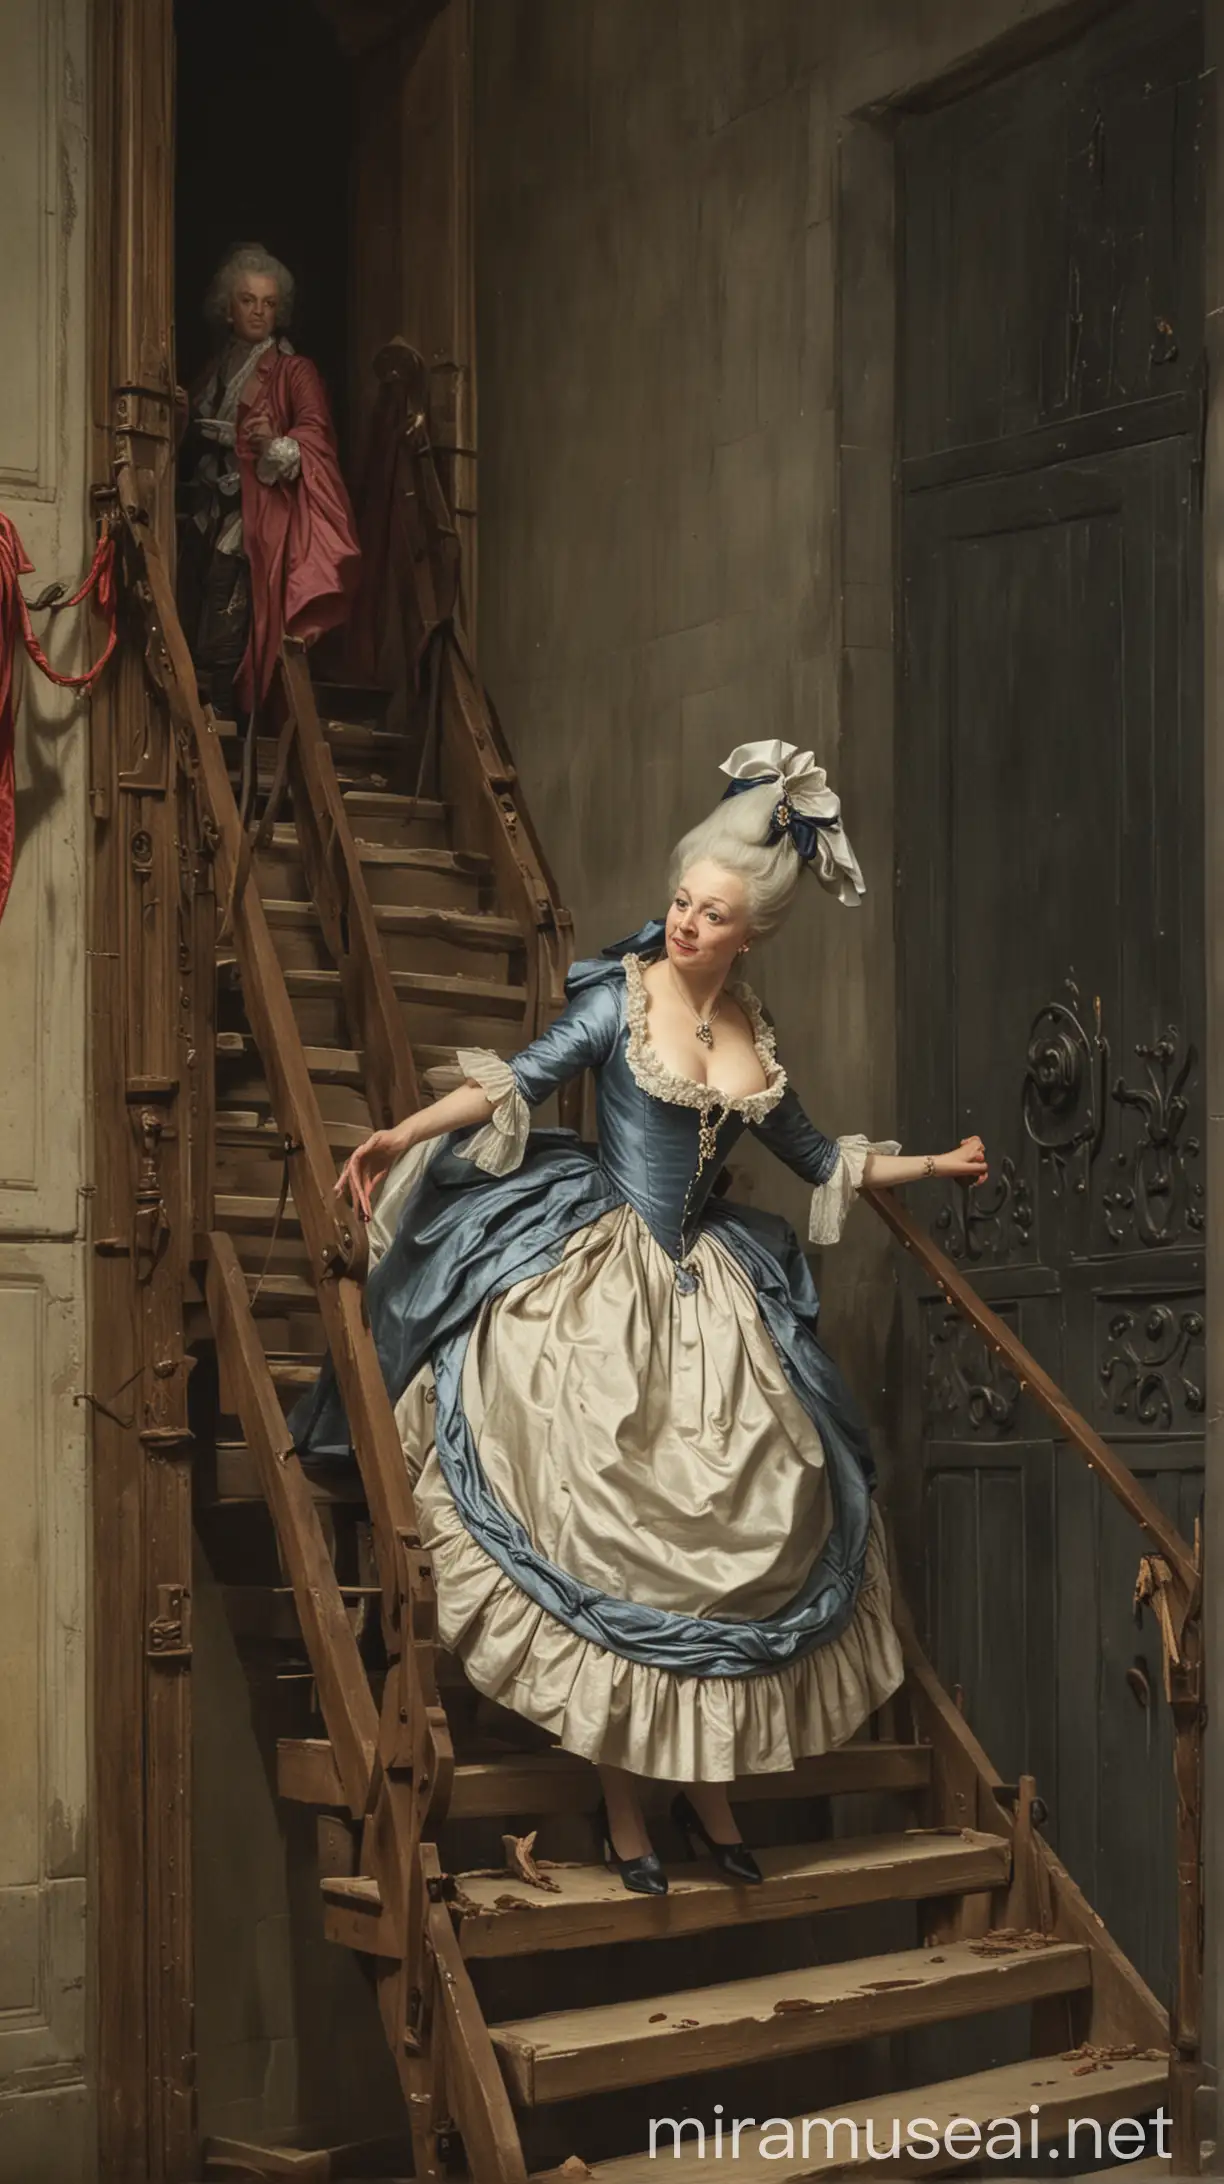 "Marie Antoinette ascending the stairs to the guillotine, accidentally stepping on the executioner's foot" hyper realistic